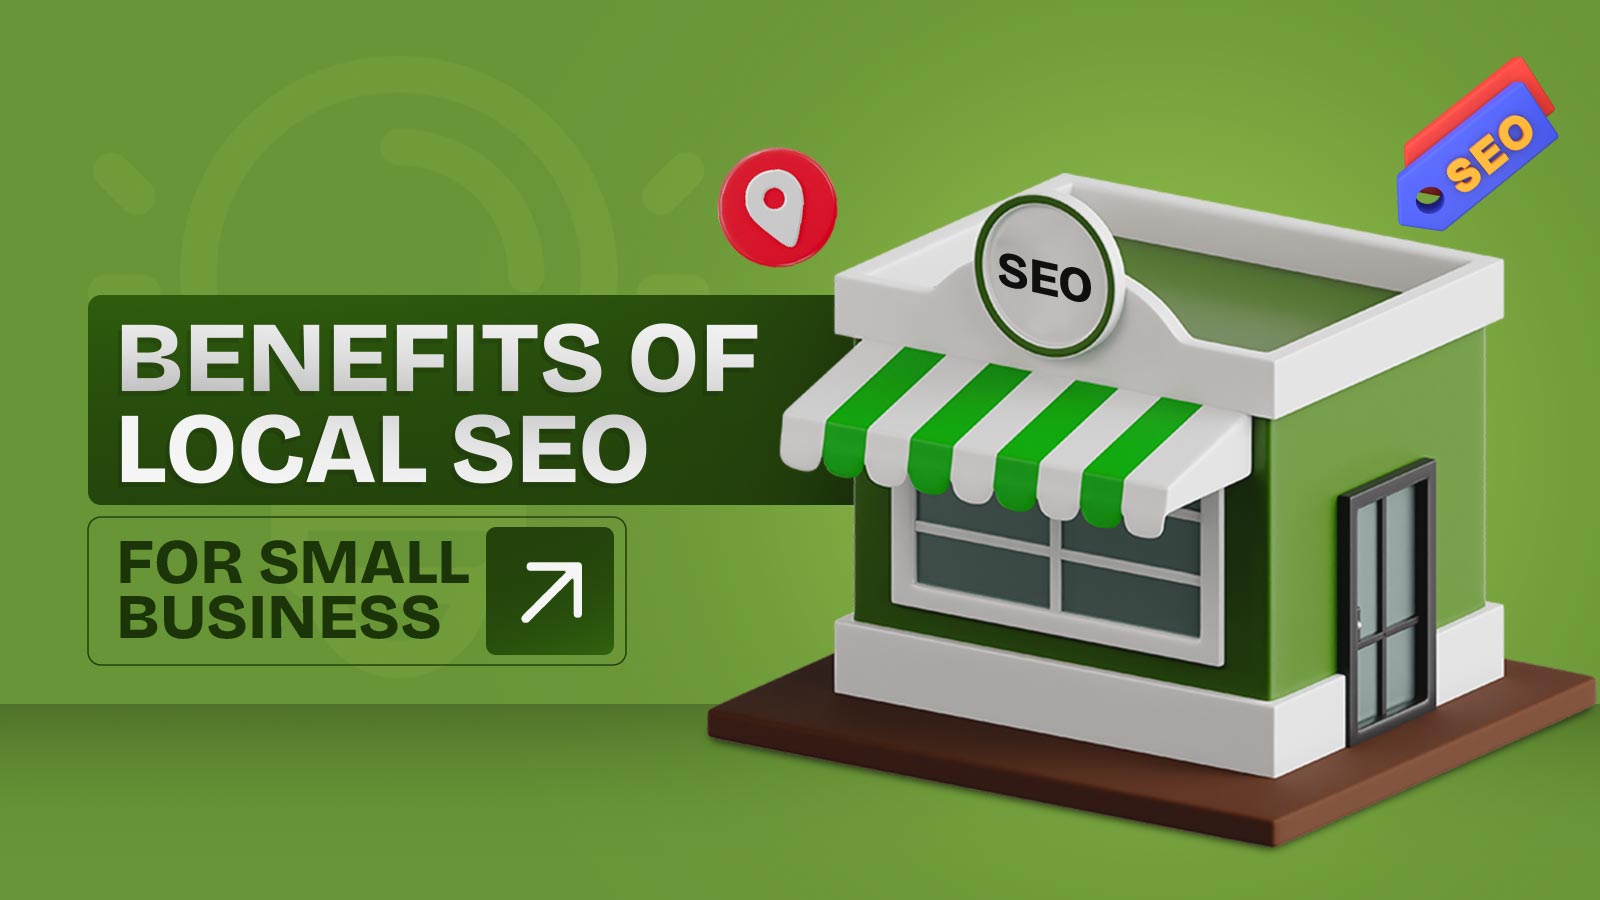 9 Key Benefits Of Local SEO For Small Business